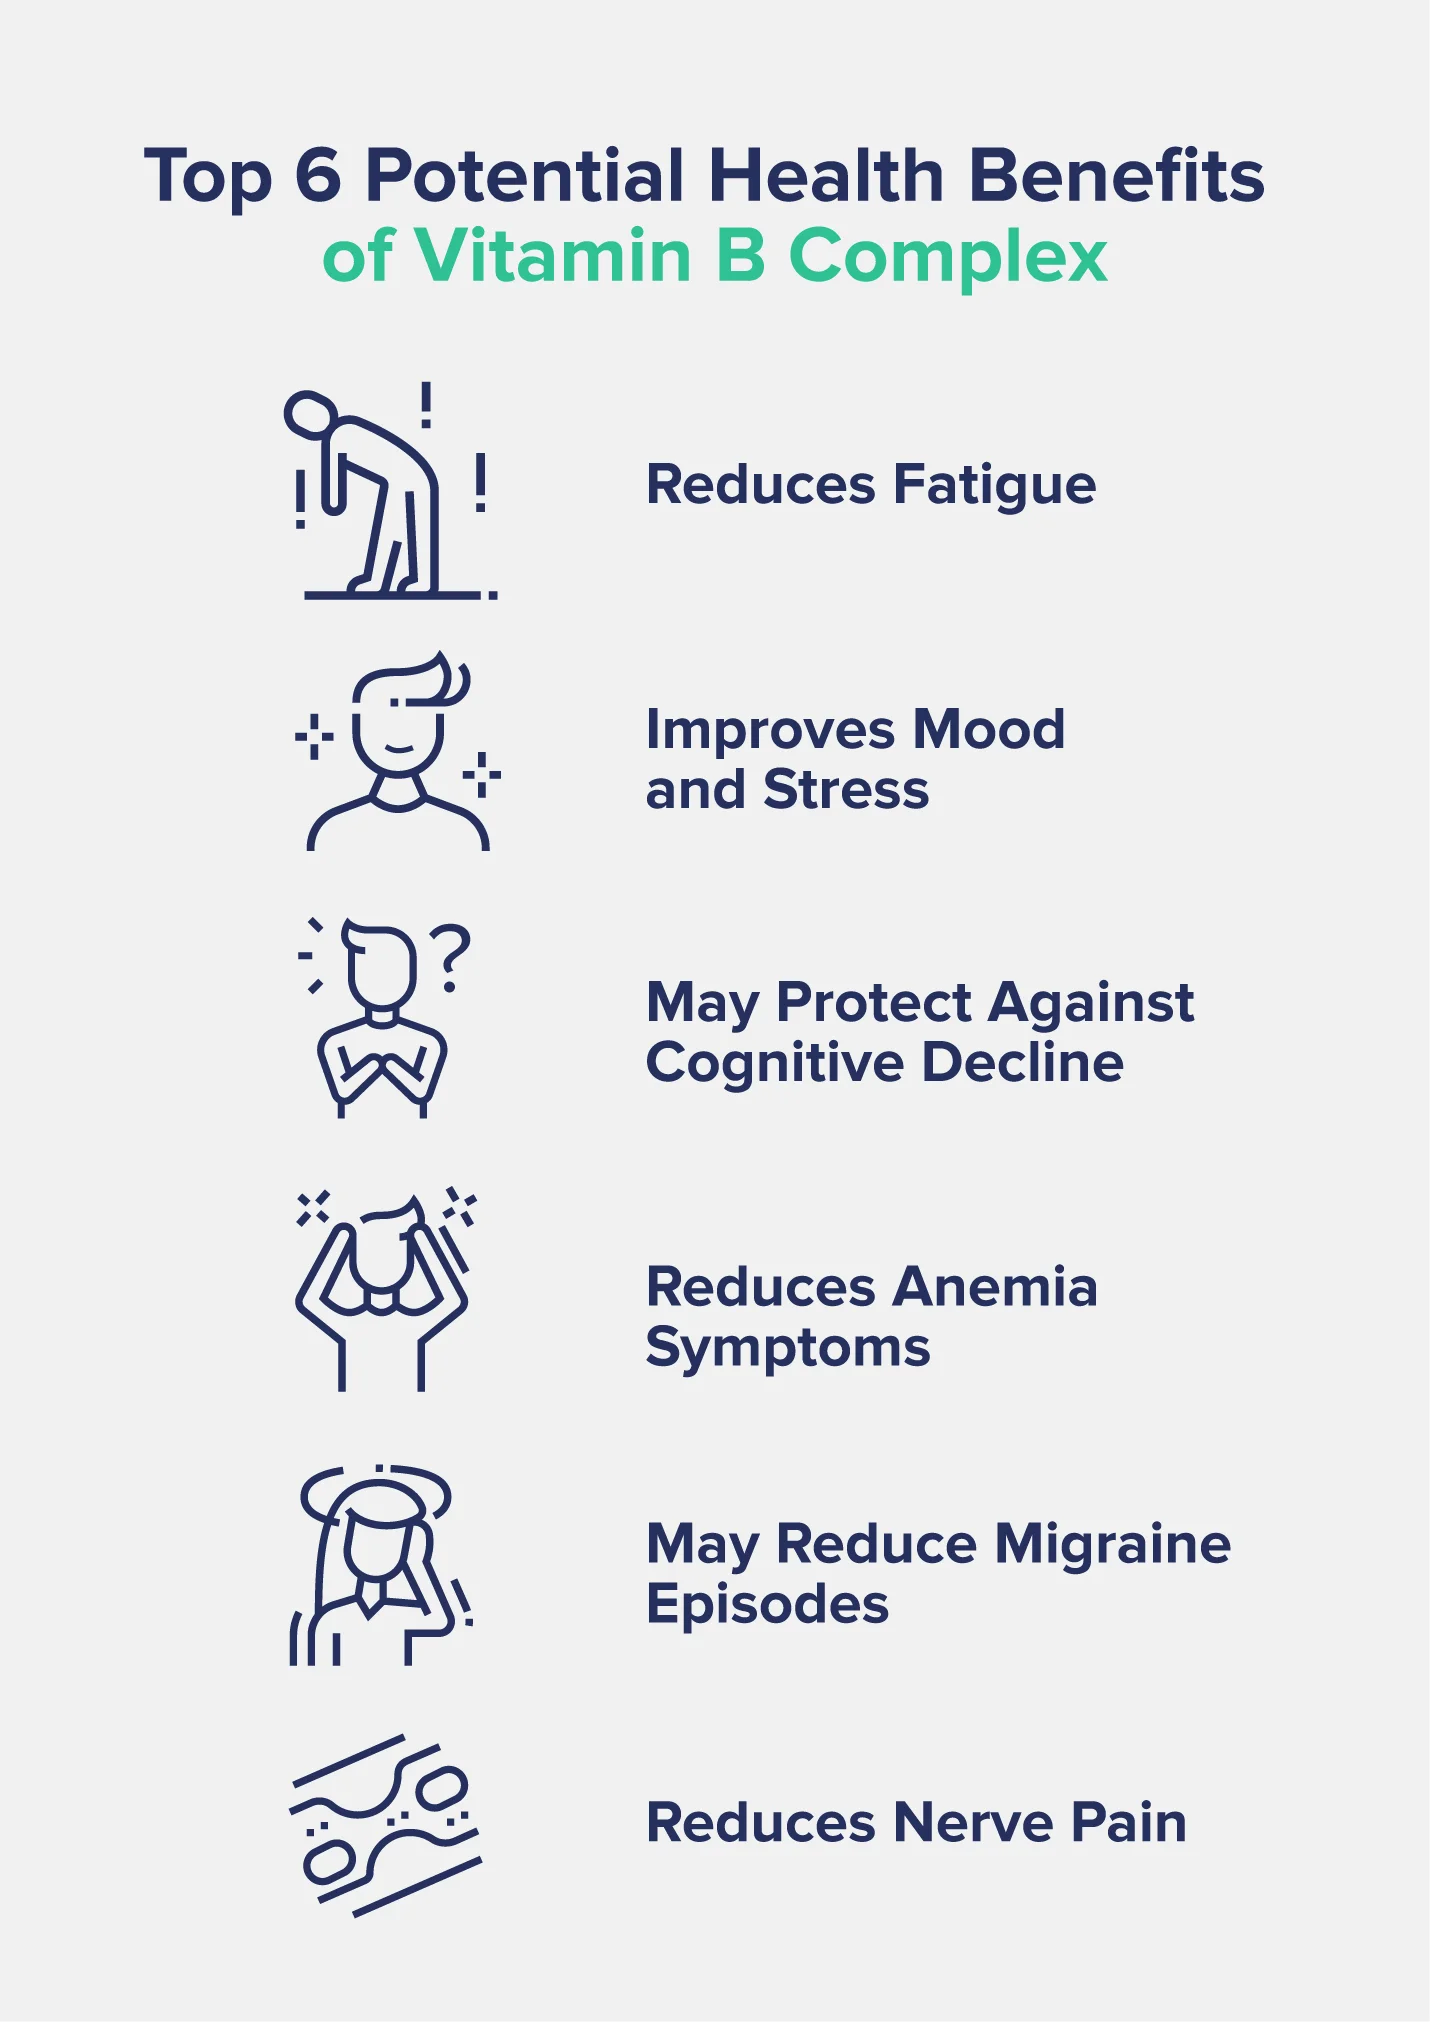 A graphic entitled "Top 6 Potential Health Benefits of Vitamin B Complex," listing such benefits as "reduces fatigue" and "improves mood and stress" along with accompanying images.